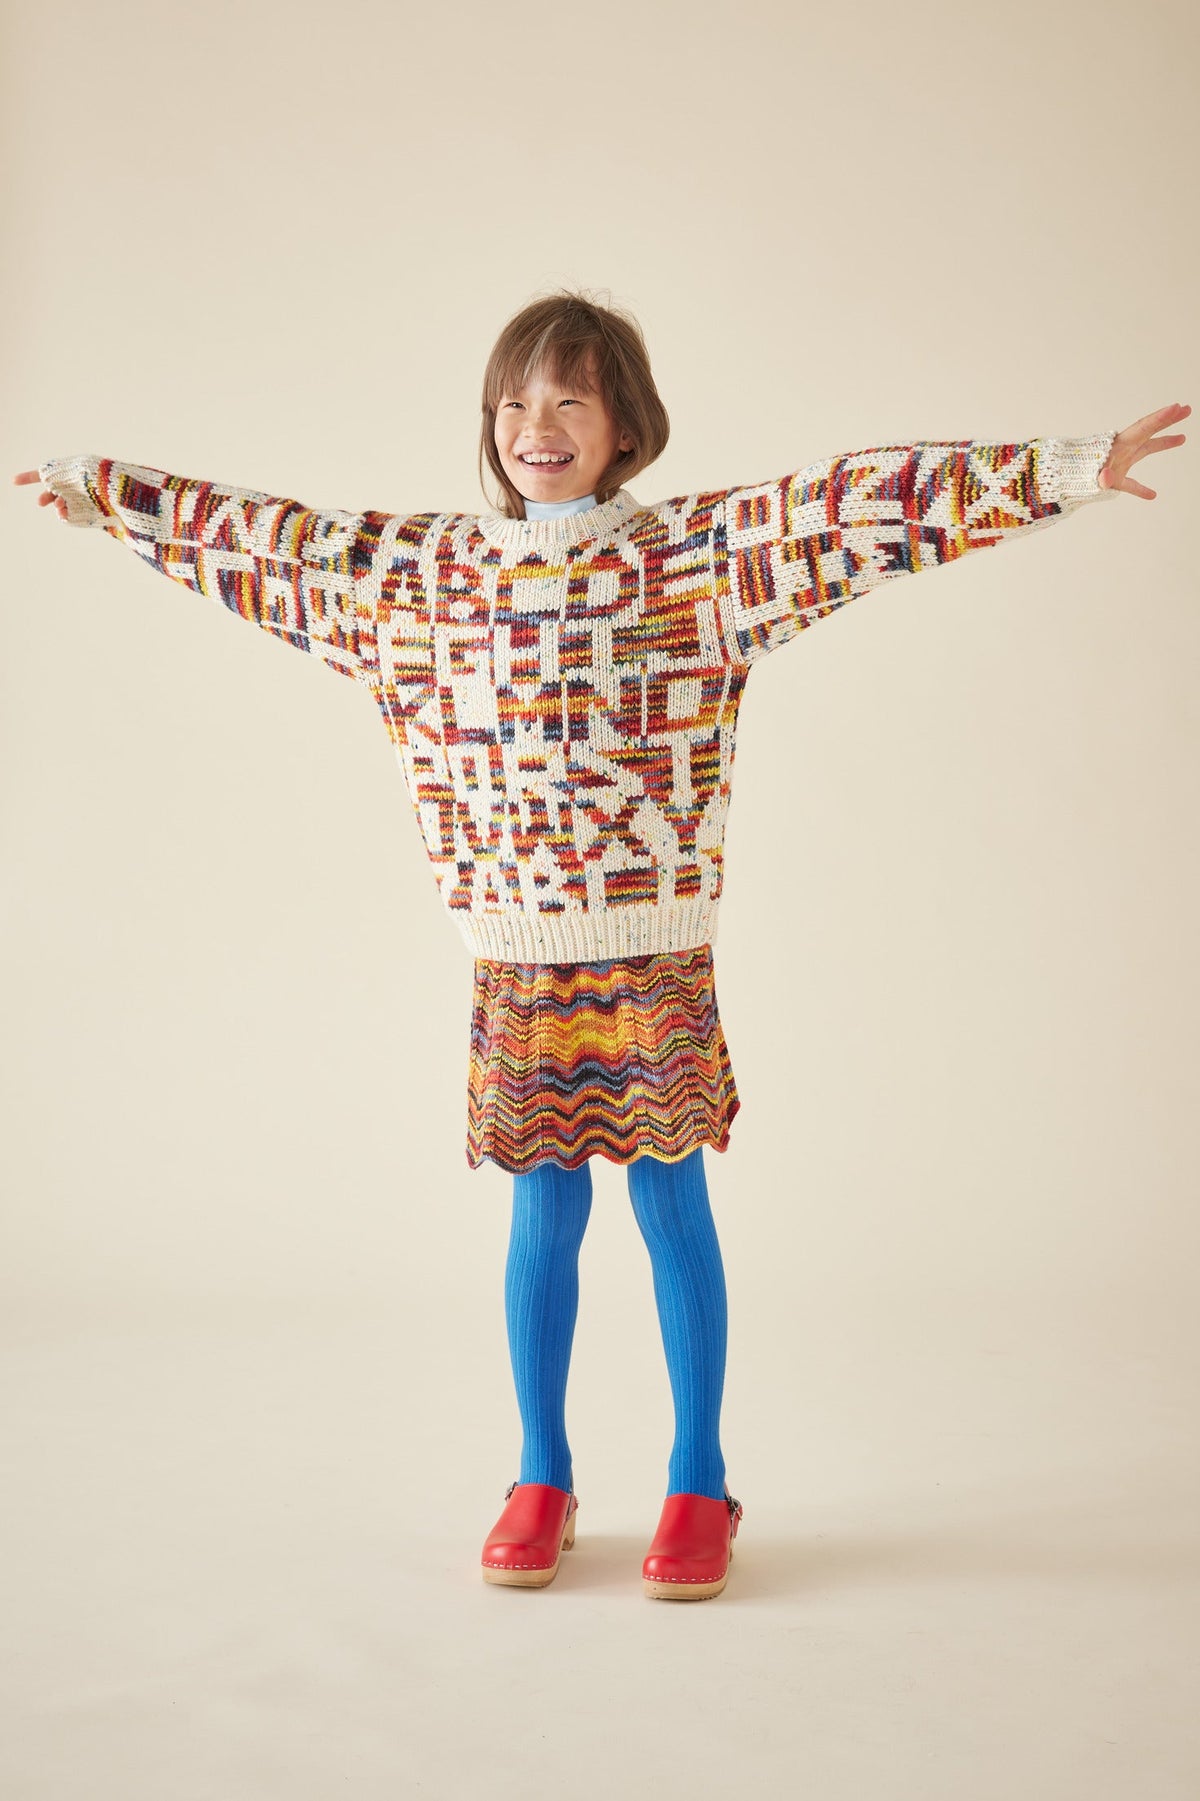 Alphabet Intarsia Sweater - Prime Confetti+Model is 51 inches tall, 51lbs, wearing a size 9-10y